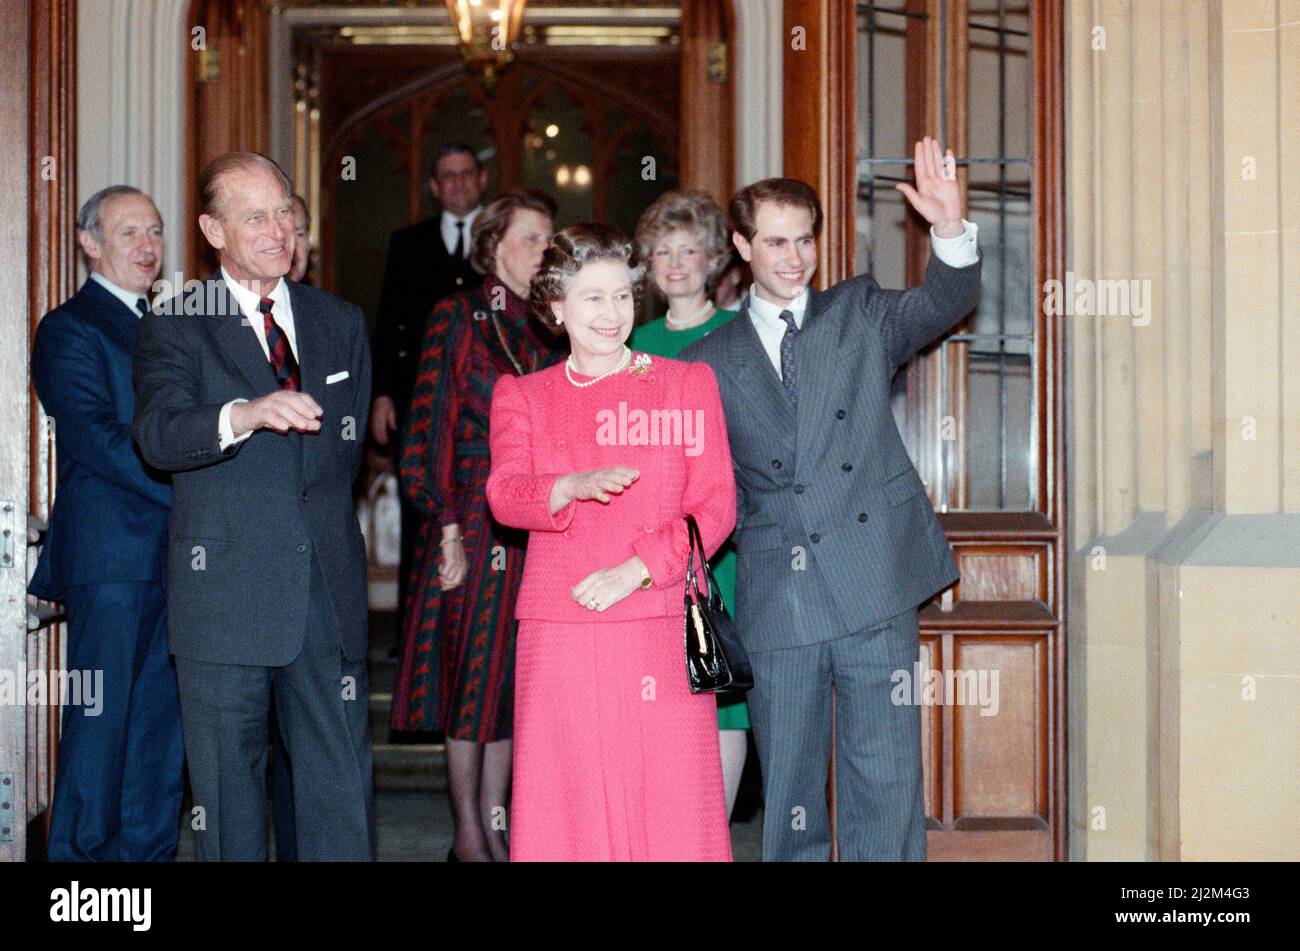 Mikhail Gorbachev, General Secretary of the Central Committee of the Communist Party of the Soviet Union, visits the Queen at Windsor Castle. Pictured, Prince Philip, the Queen and Prince Edward saying goodbye to Gorbachev. 7th April 1989. Stock Photo